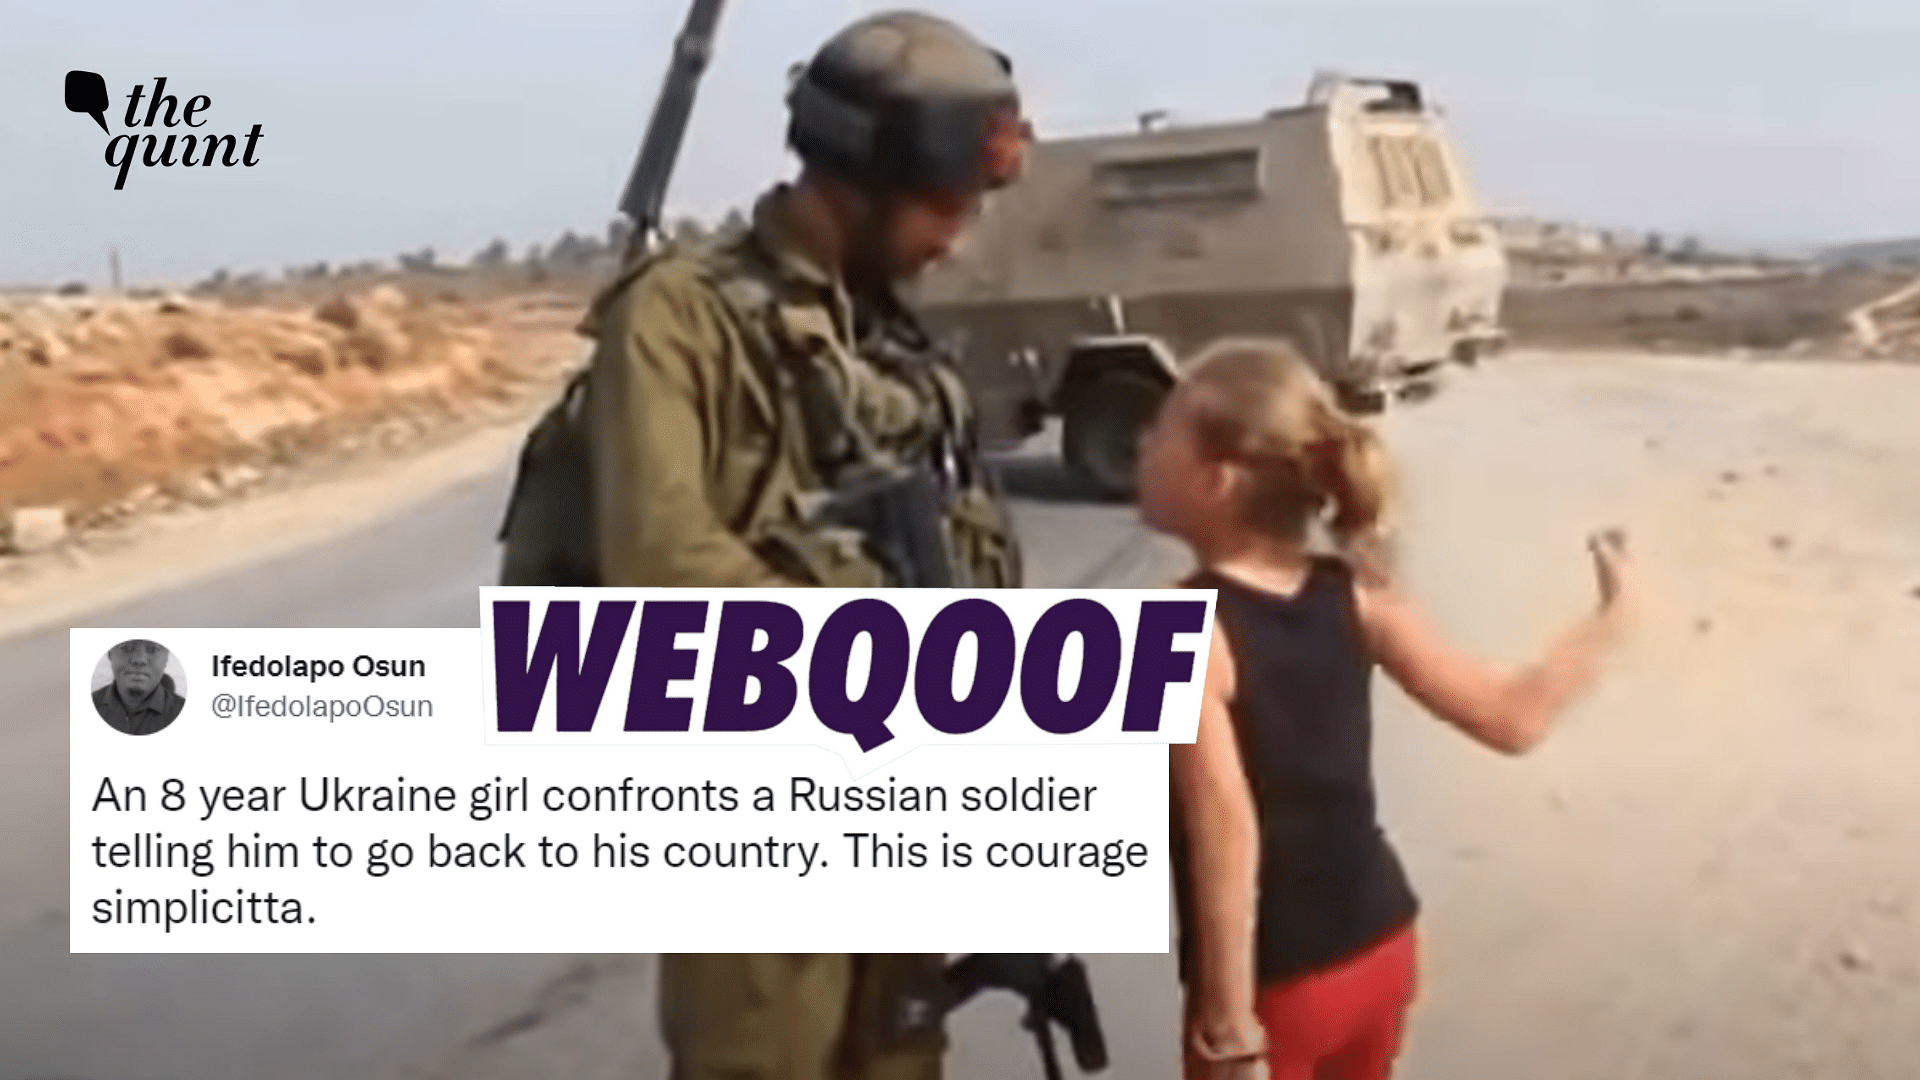 Video shows Ukranian girl confronting a Russian soldier.